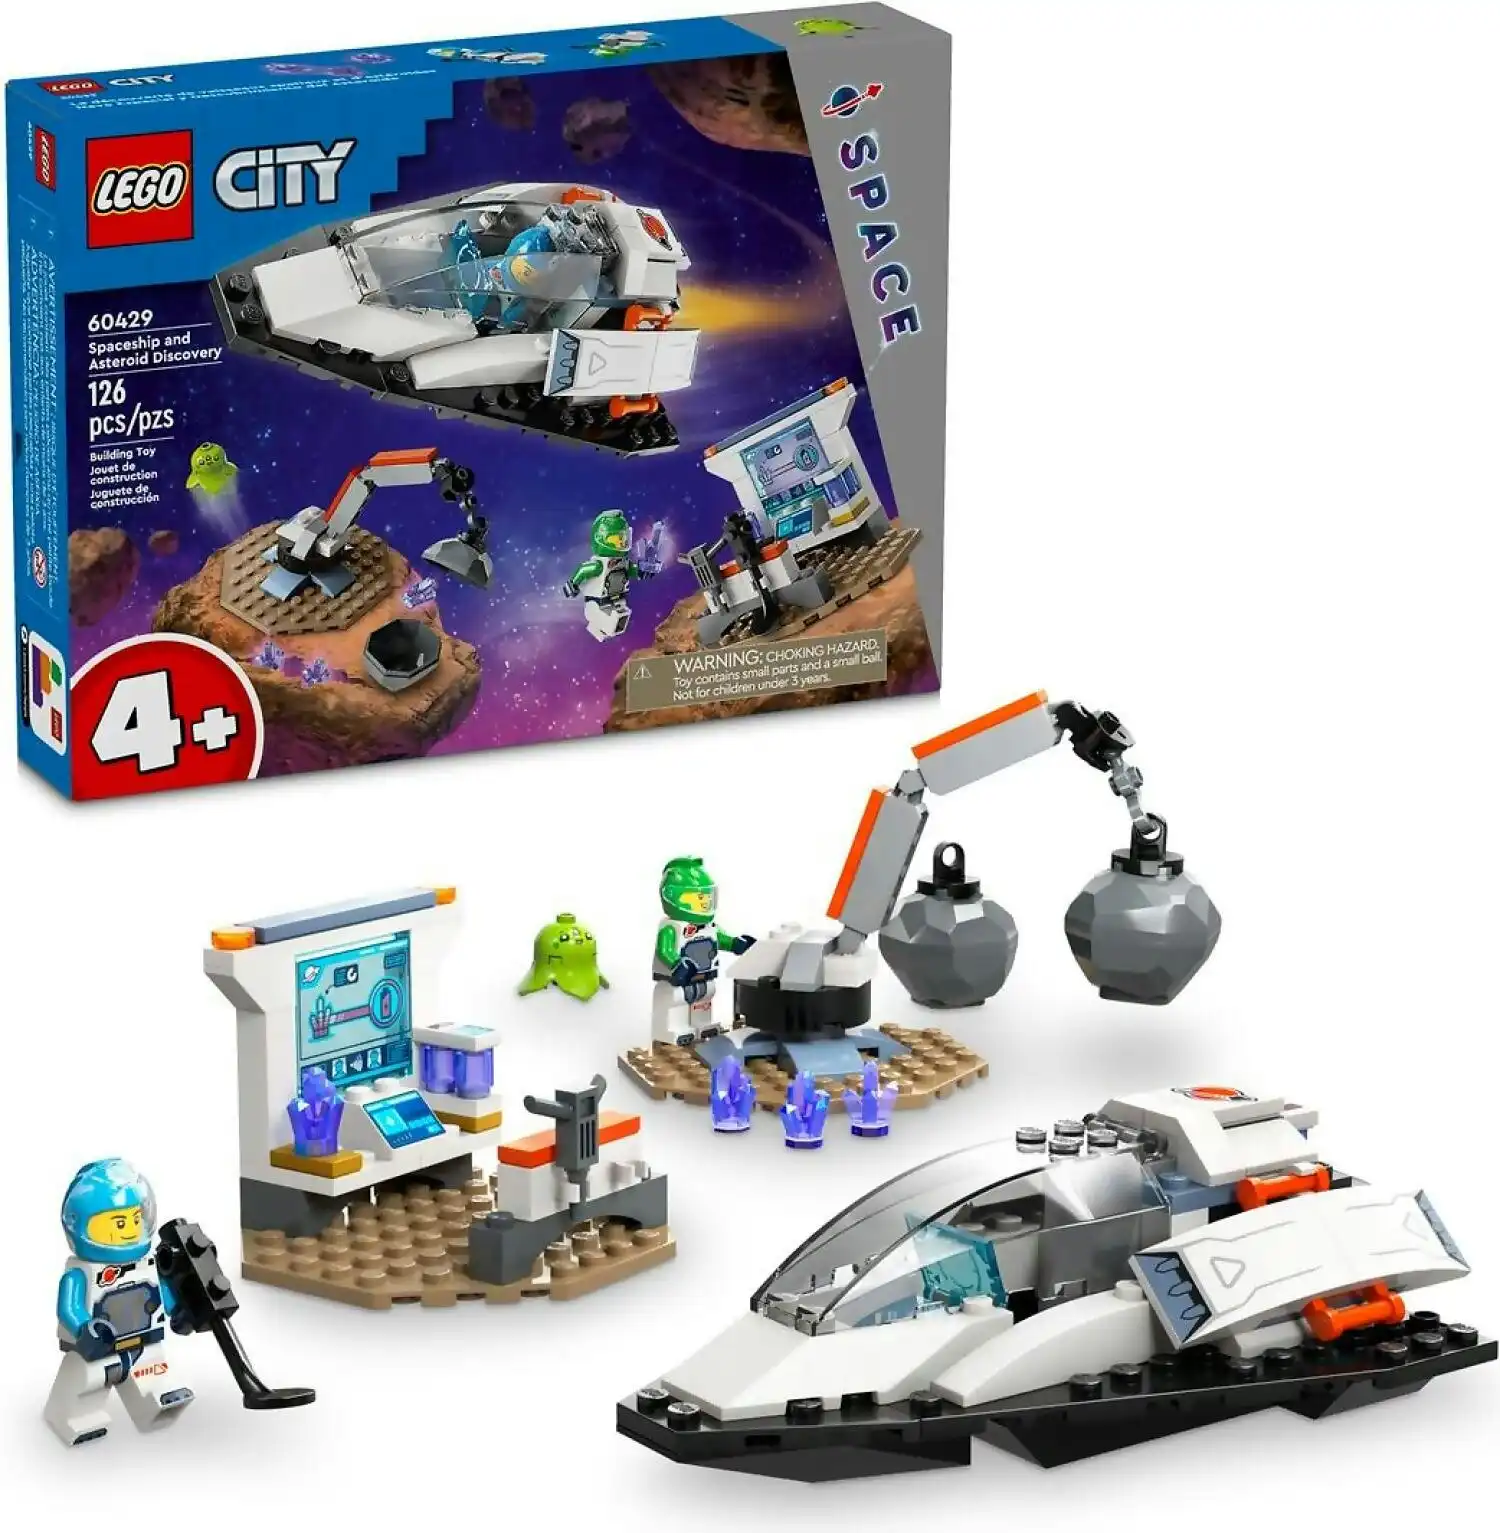 LEGO 60429 Spaceship and Asteroid Discovery - City 4+